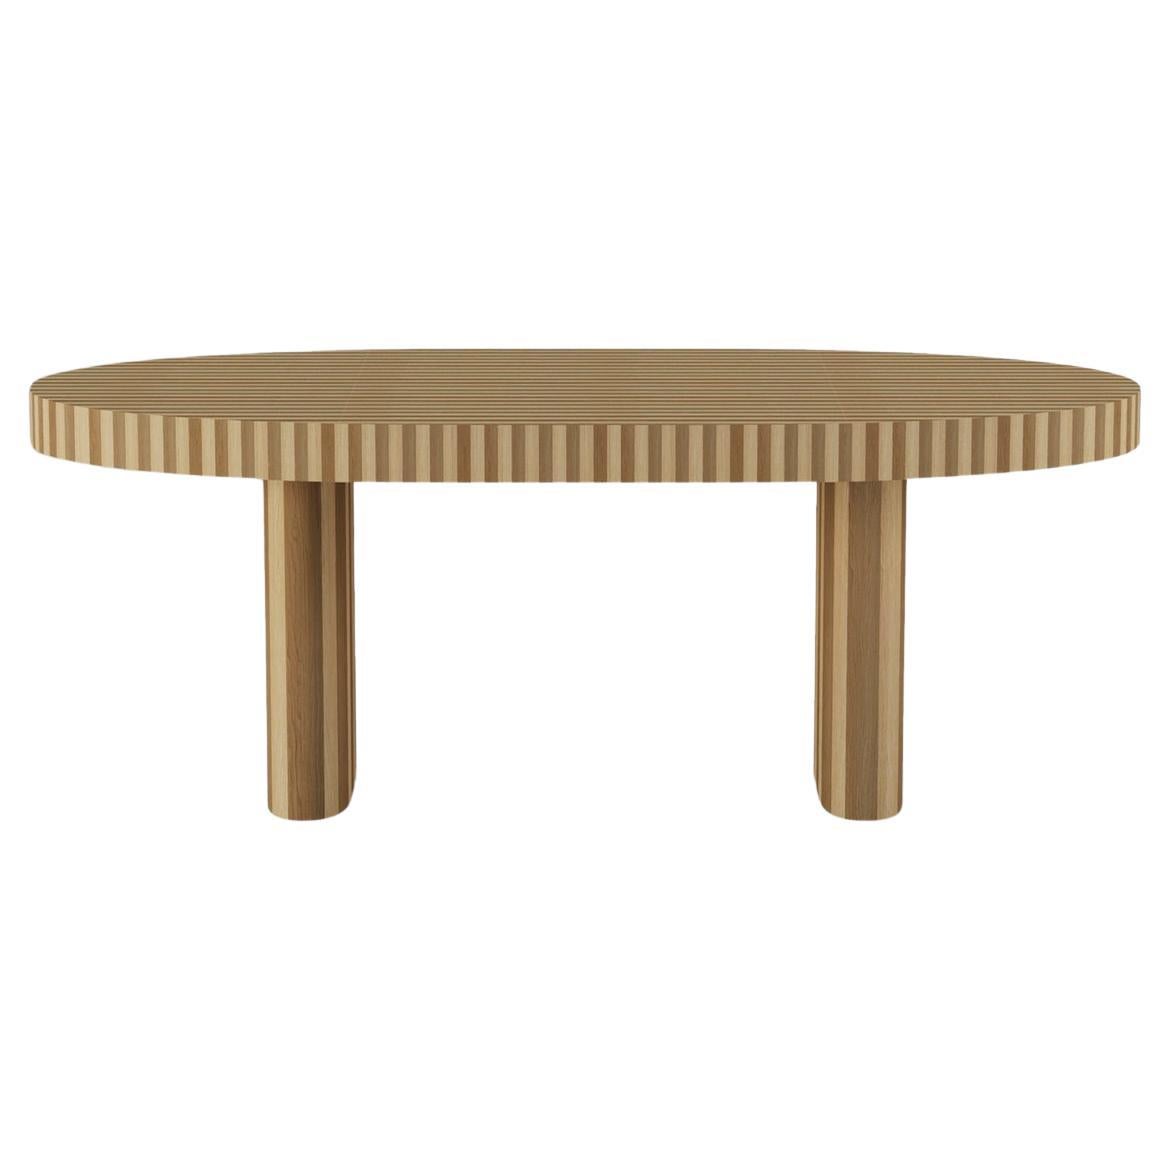 DOOQ Nusa Oval Dining Table Organic Modern in Natural Wood Marquetery  For Sale